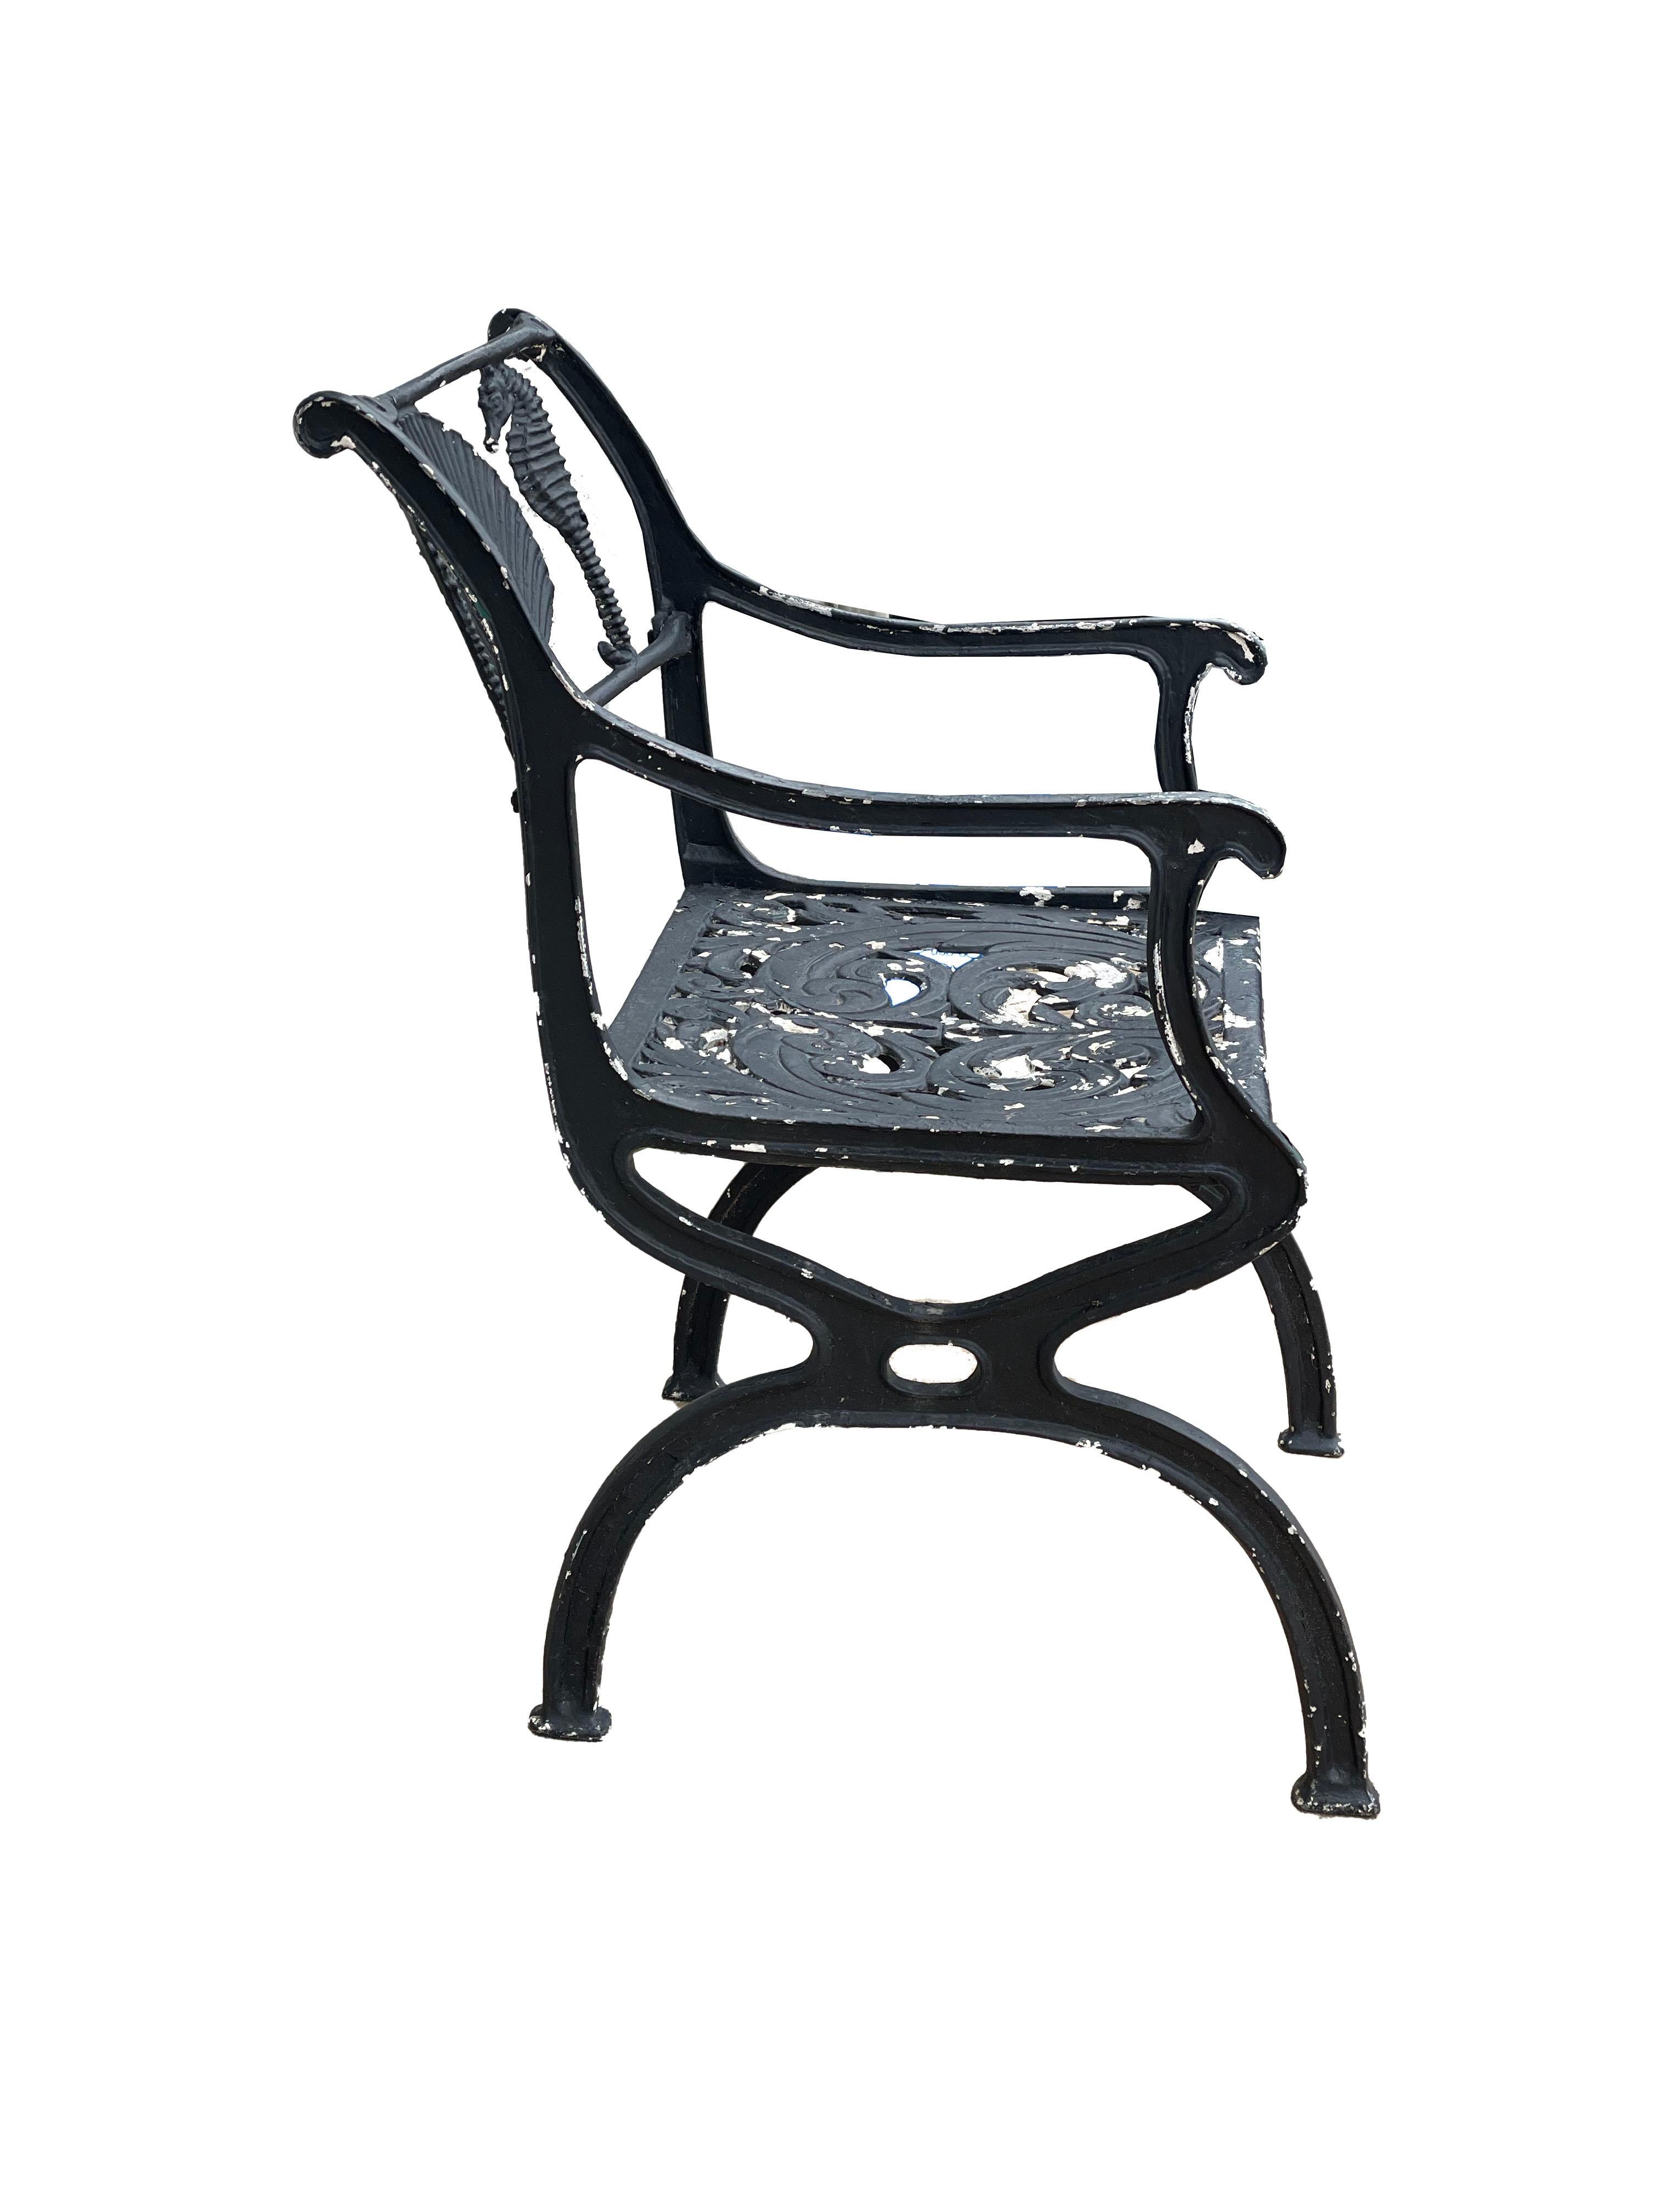 North American Antique Cast Iron Sea Horse Chairs by Molla, a Pair